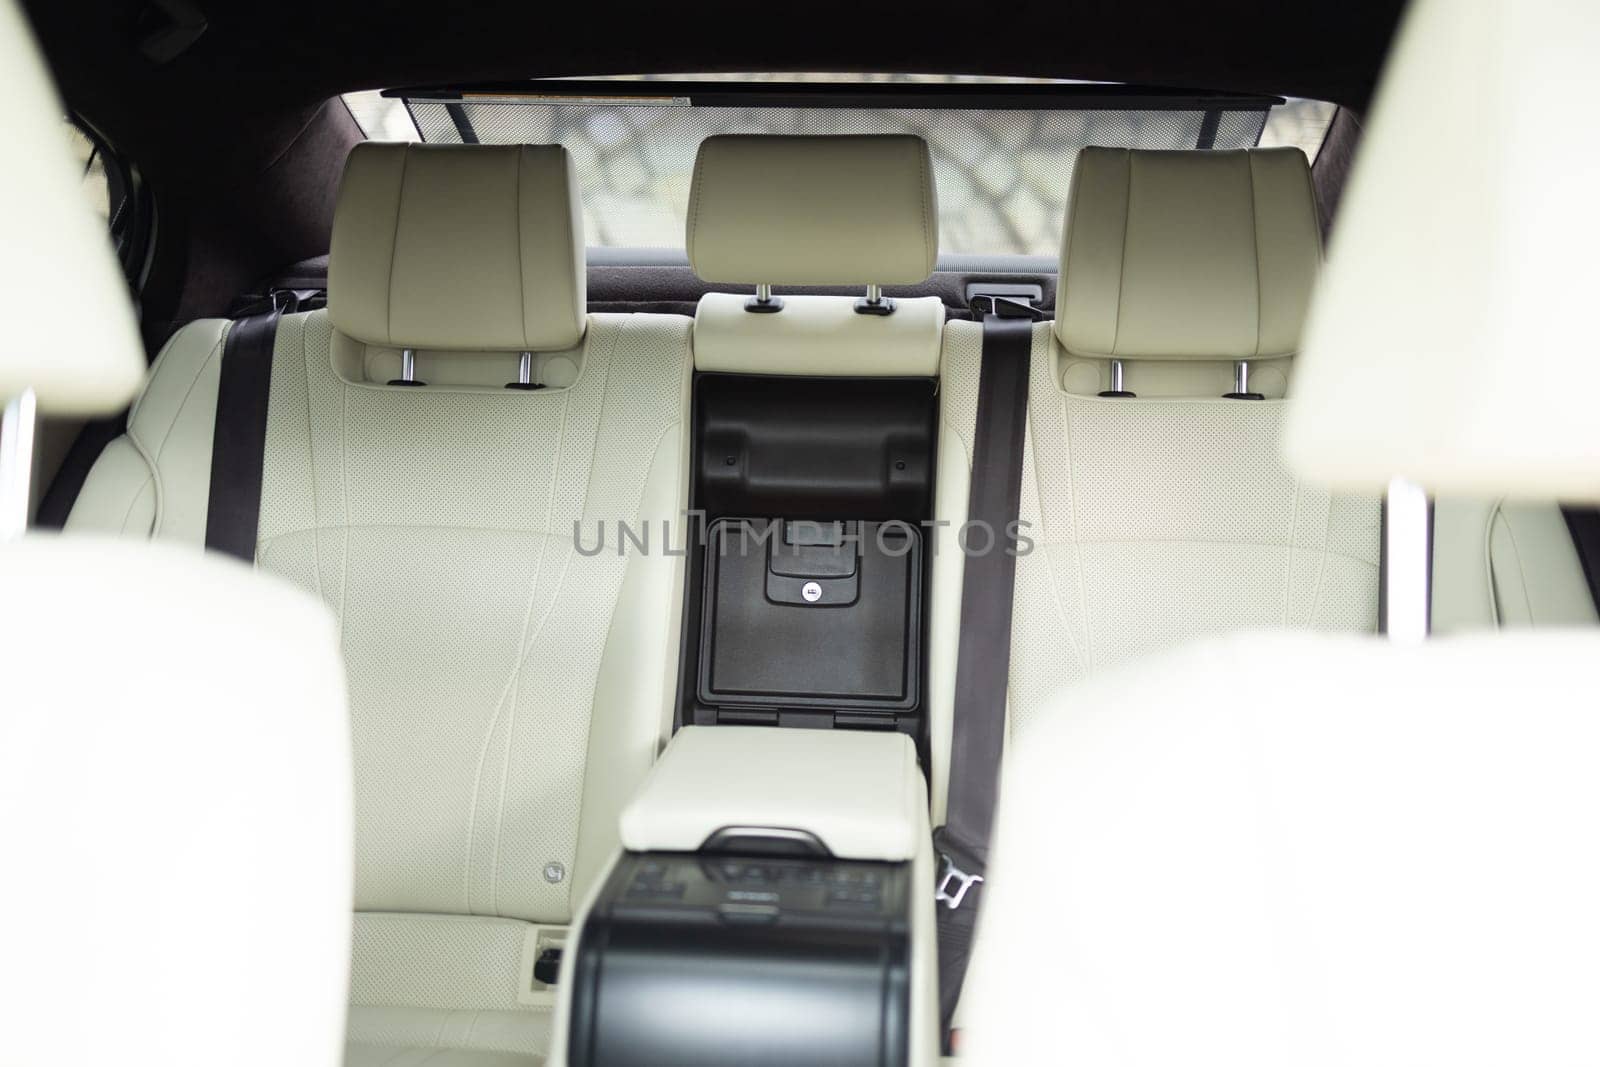 New car inside. Car cleaning theme. Luxury car rear leather seats row. Interior of new modern clean expensive car. Passenger seats with leather. Closeup details by uflypro